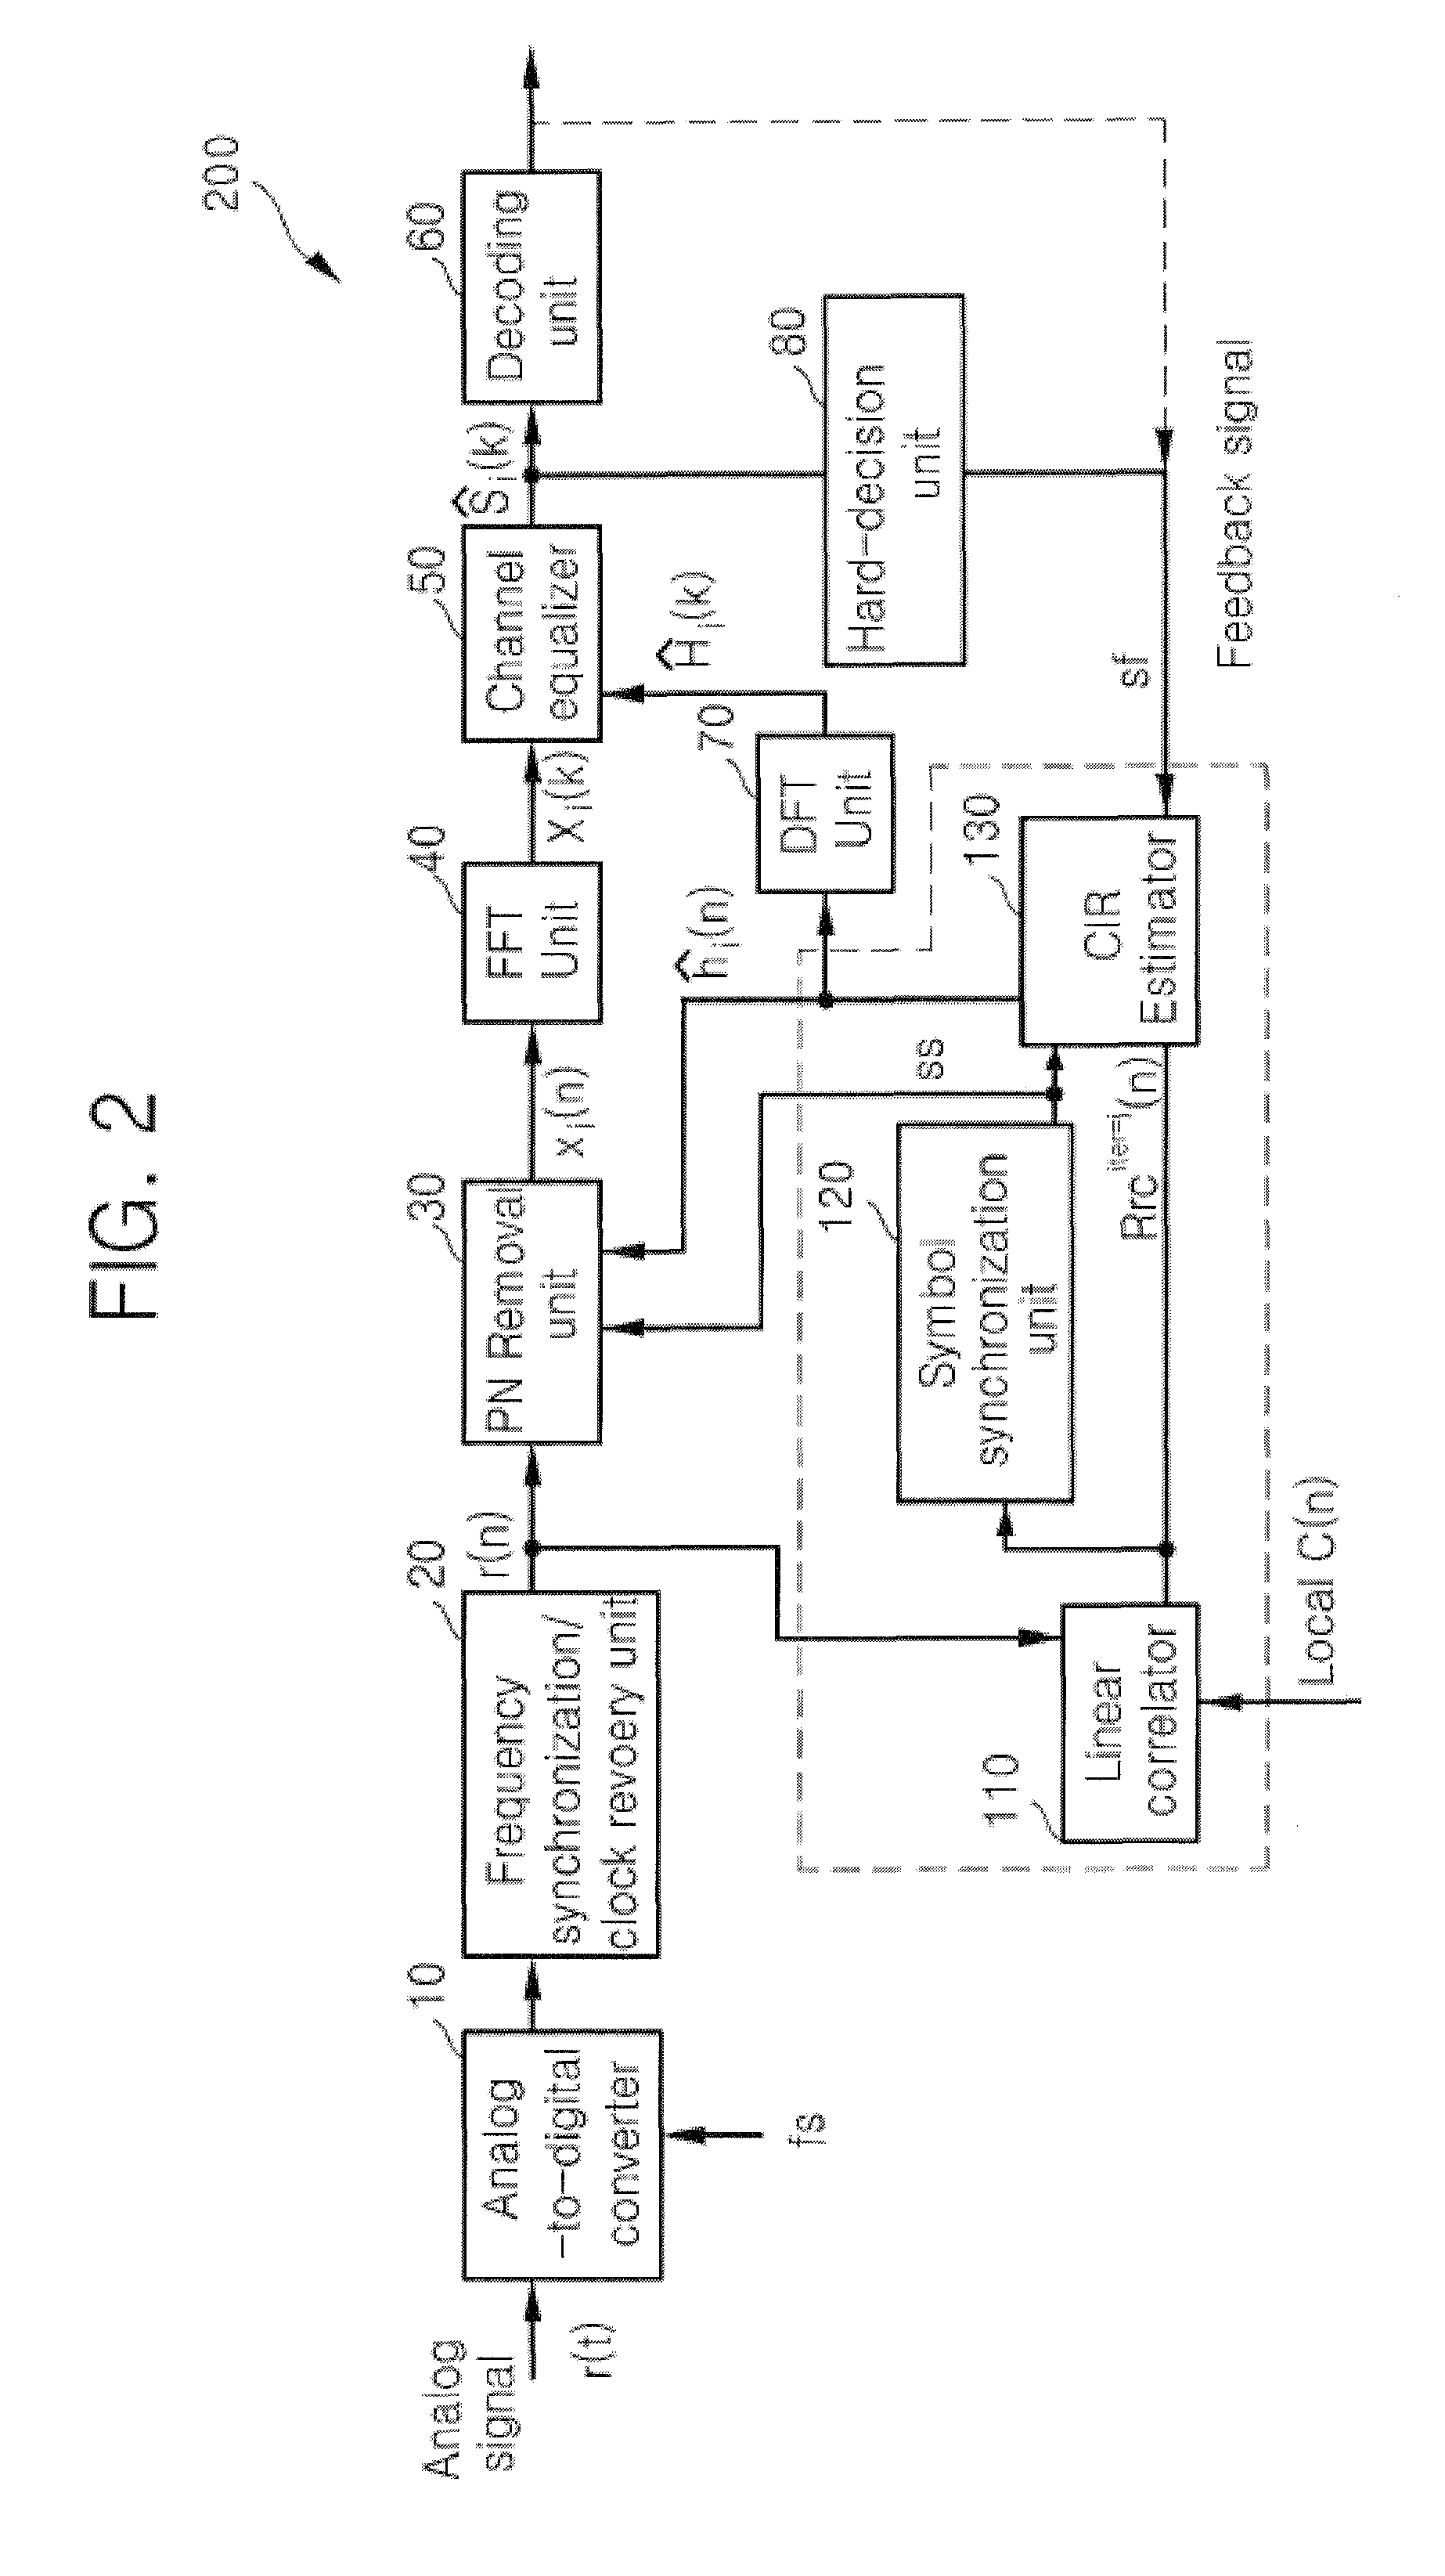 Channel estimation method and system using linear correlation based interference cancellation (LCIC) combined with decision-feedback-equalization (DFE)